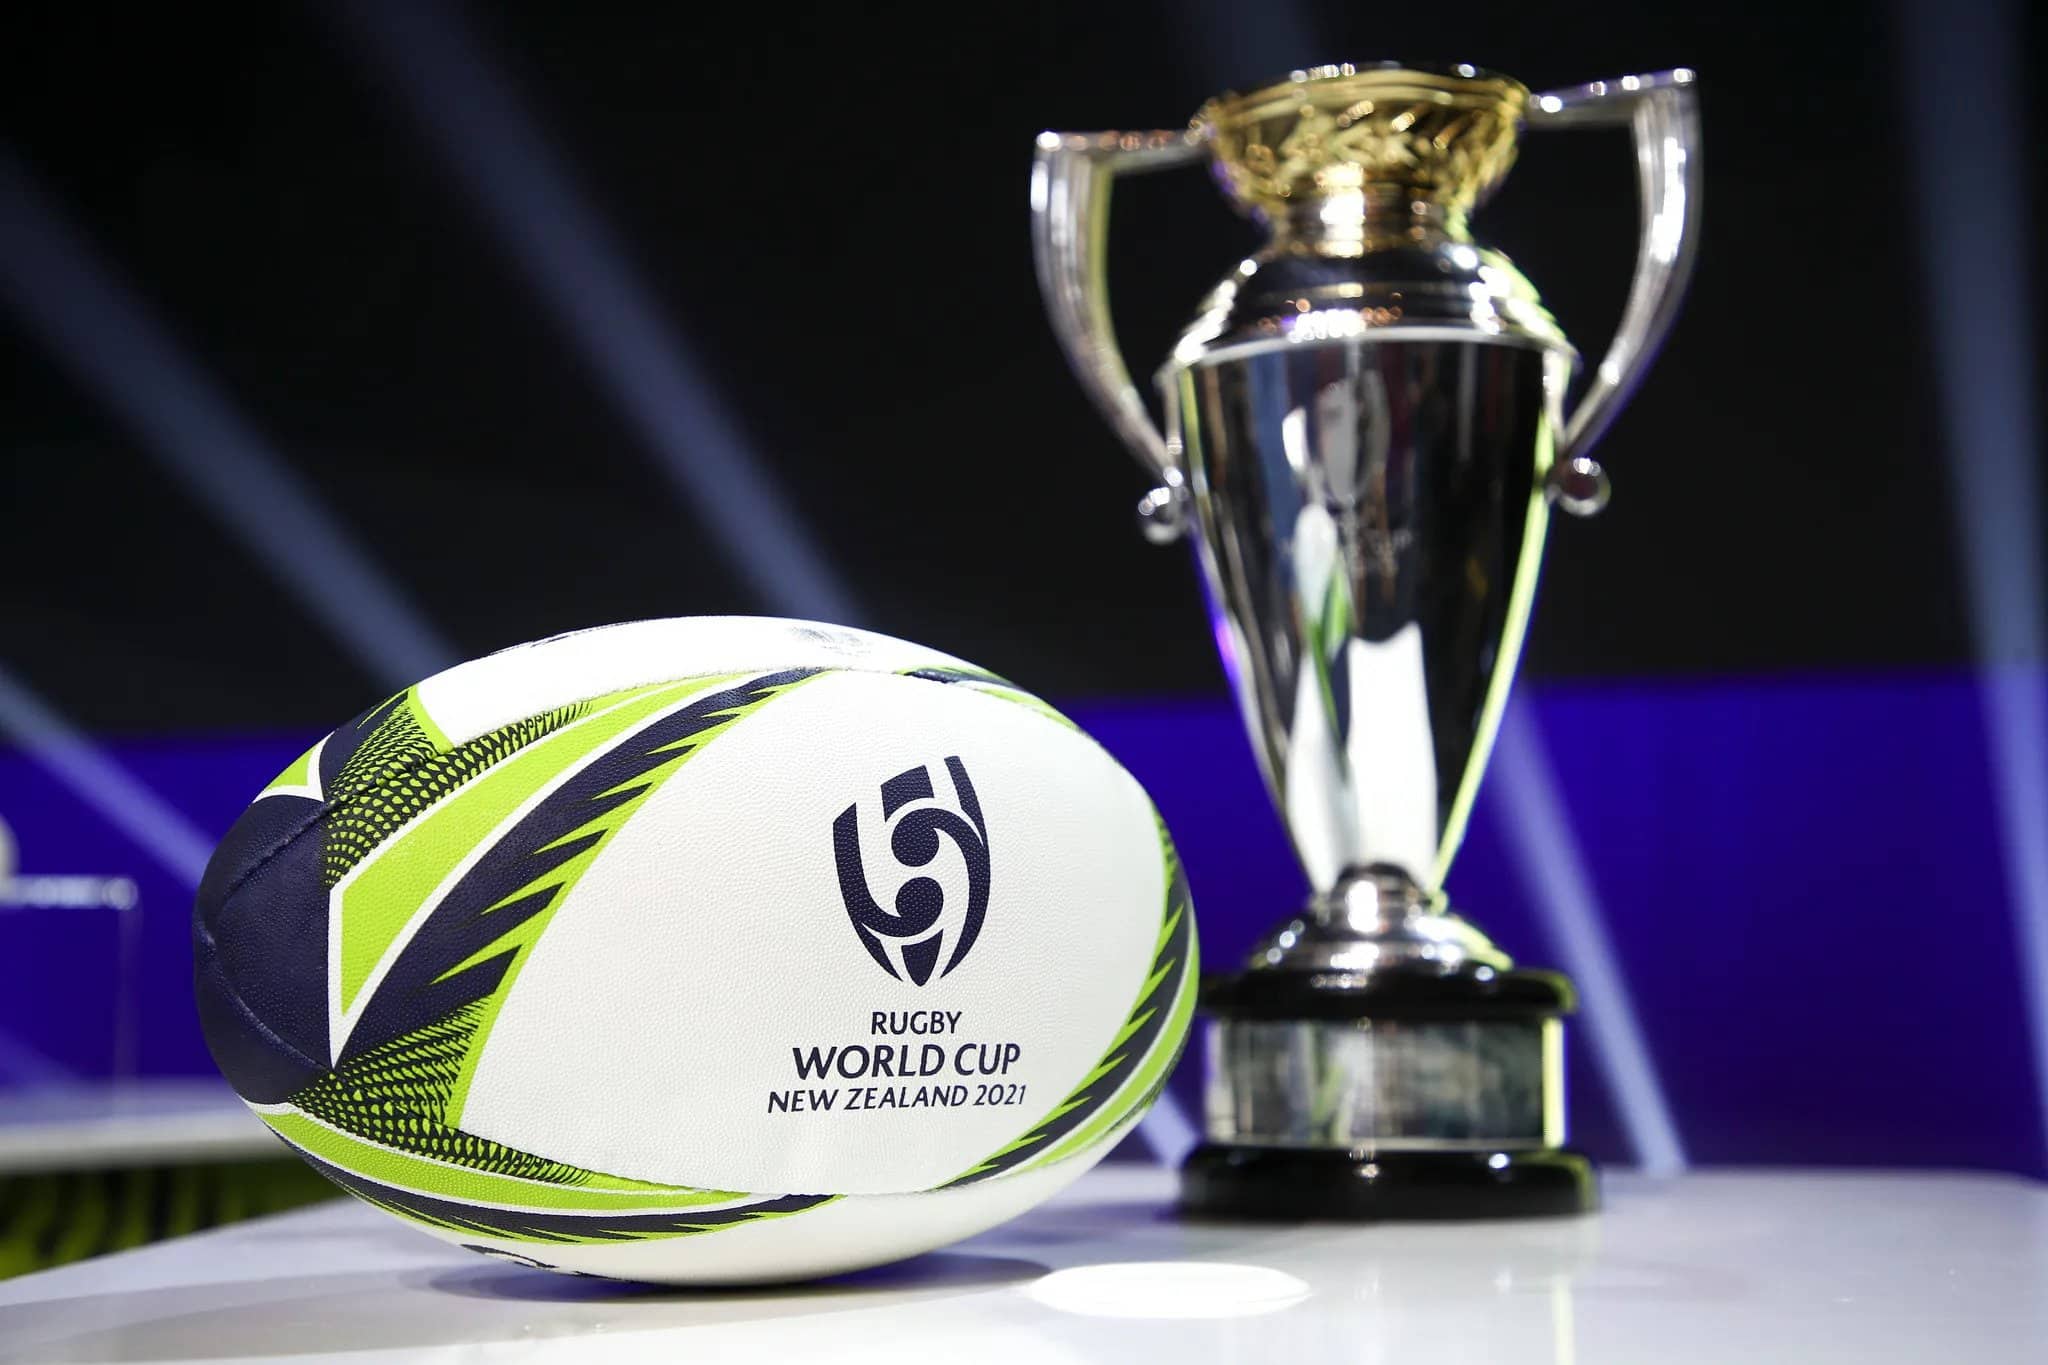 World’s top players to wear smart mouthguards at rugby world cup 2021 in landmark agreement to help reduce concussions